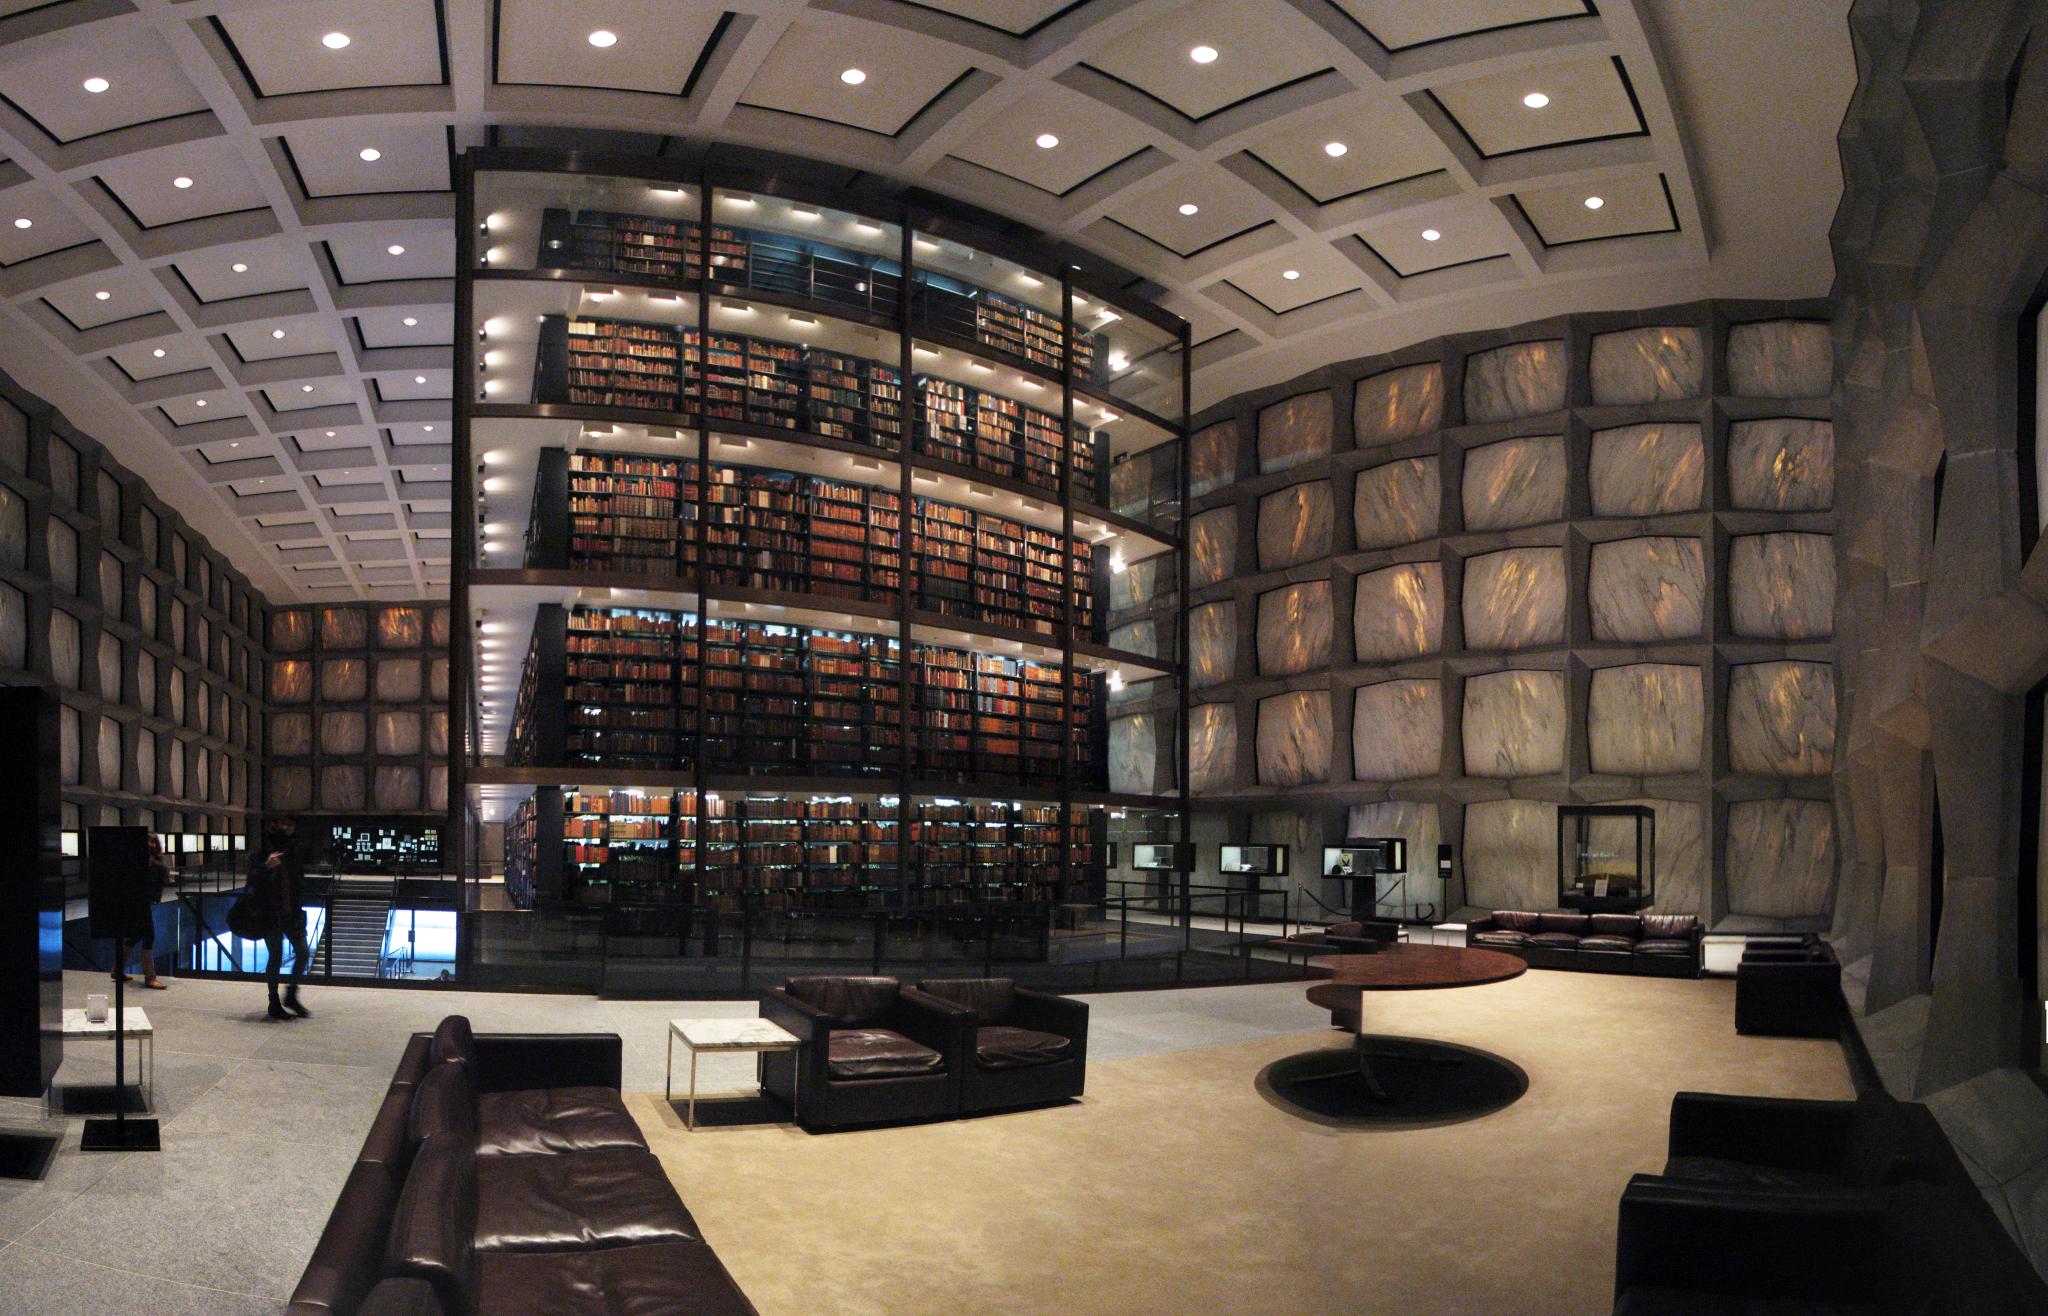 I'm gonna need to read all these.&nbsp;"Yale University's Beinecke Rare Book and Manuscript Library" by Lauren Manning - Flickr: Yale University's Beinecke Rare Book and Manuscript Library. Licensed under CC BY 2.0 via Wikimedia Commons.&nbsp;